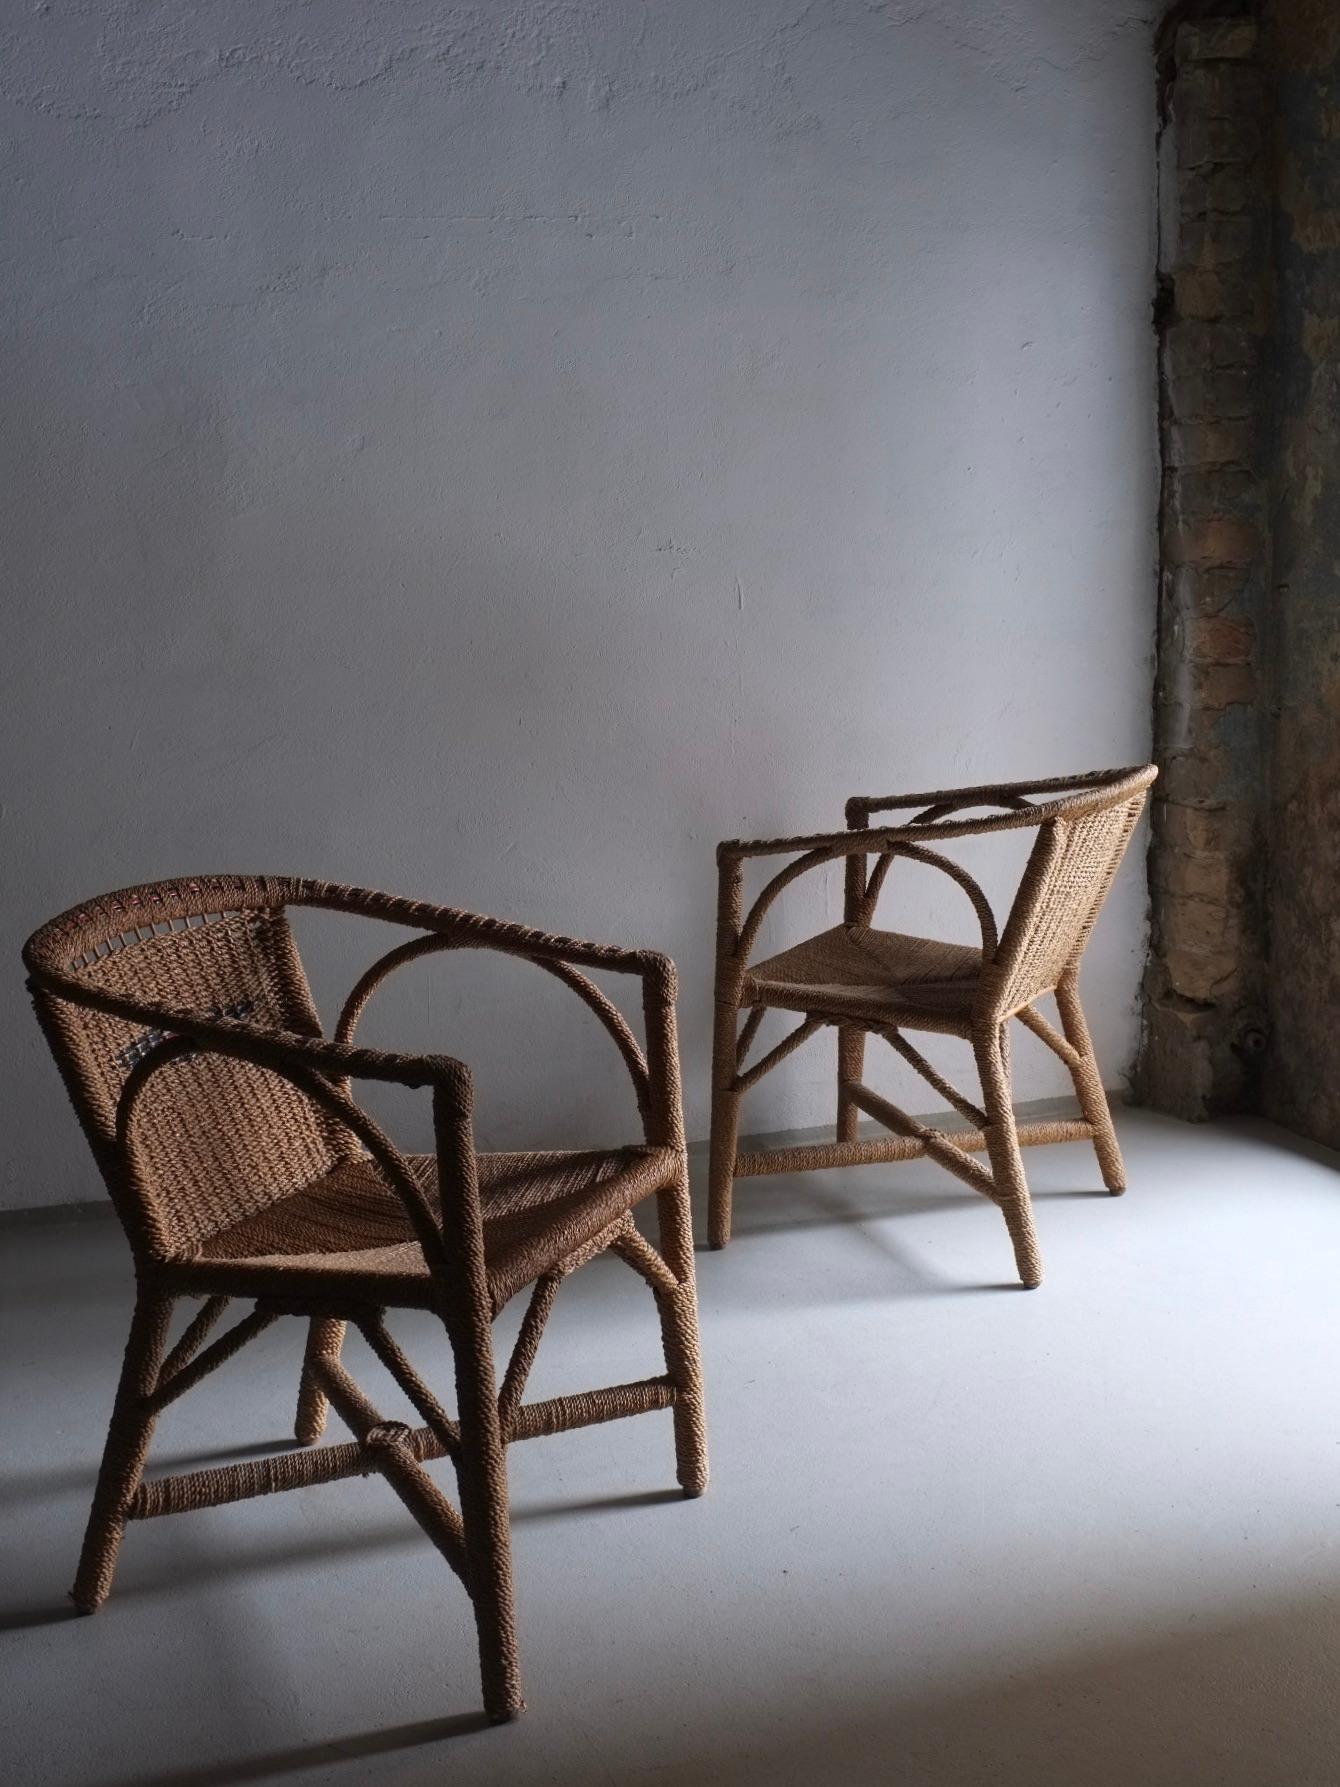 Vintage woven wicker patio or garden furniture set. Despite the material, it’s preserved very well.

Additional information:
Country of manufacture: Unknown (most likely to be from France)
Design period: 1970s (or earlier)
Dimensions: Chair : 53 W x